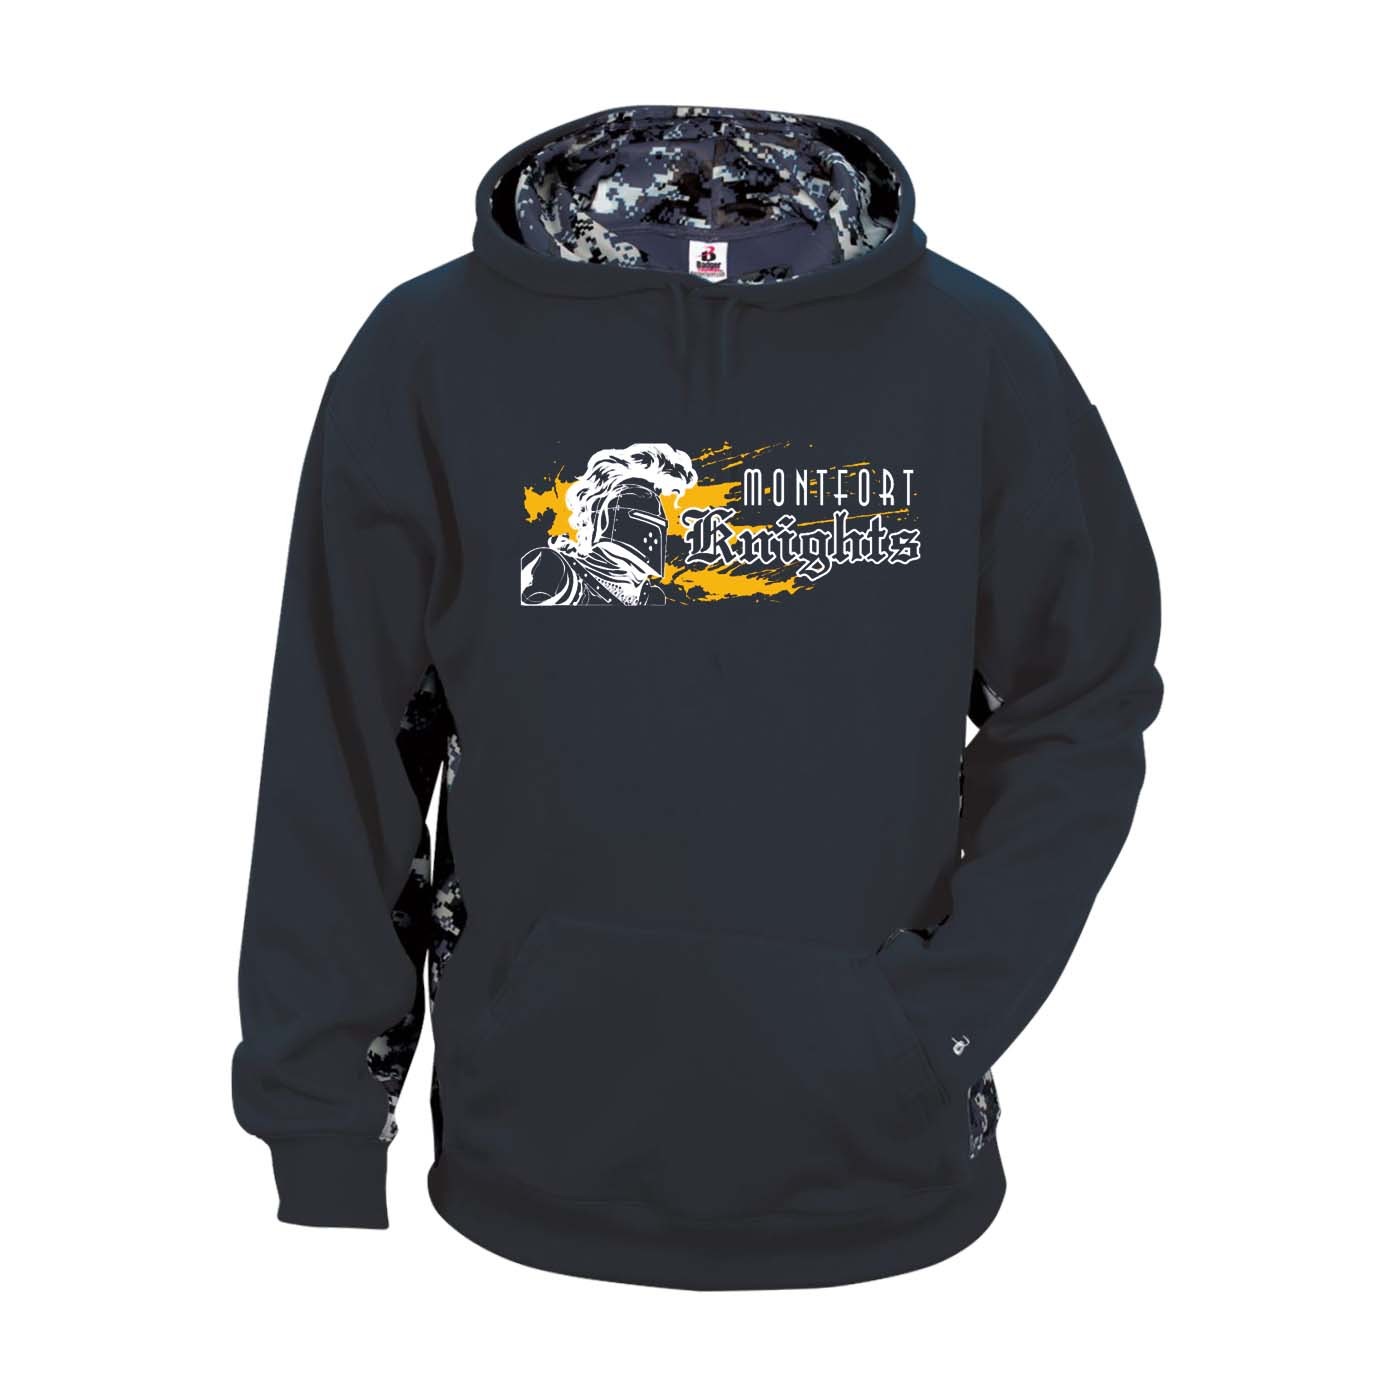 MONTFORT Spirit Digital Color Block Hoodie w/ White Knight Logo - Please Allow 2-3 Weeks for Delivery